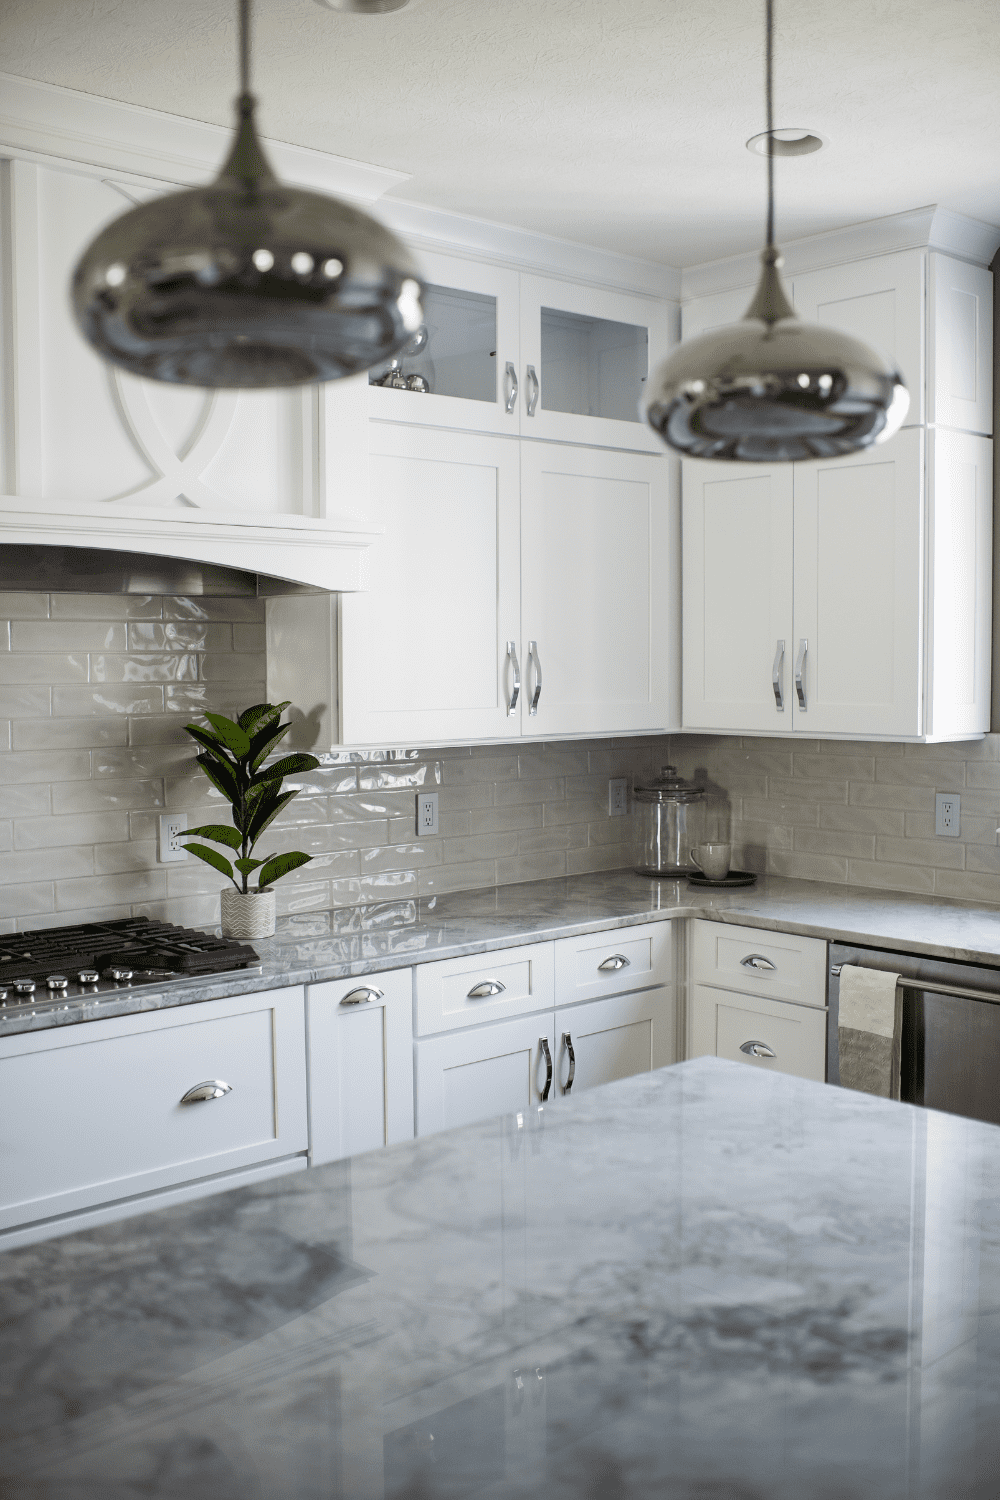 Nicholas Design Build | A kitchen with white cabinets and marble counter tops.